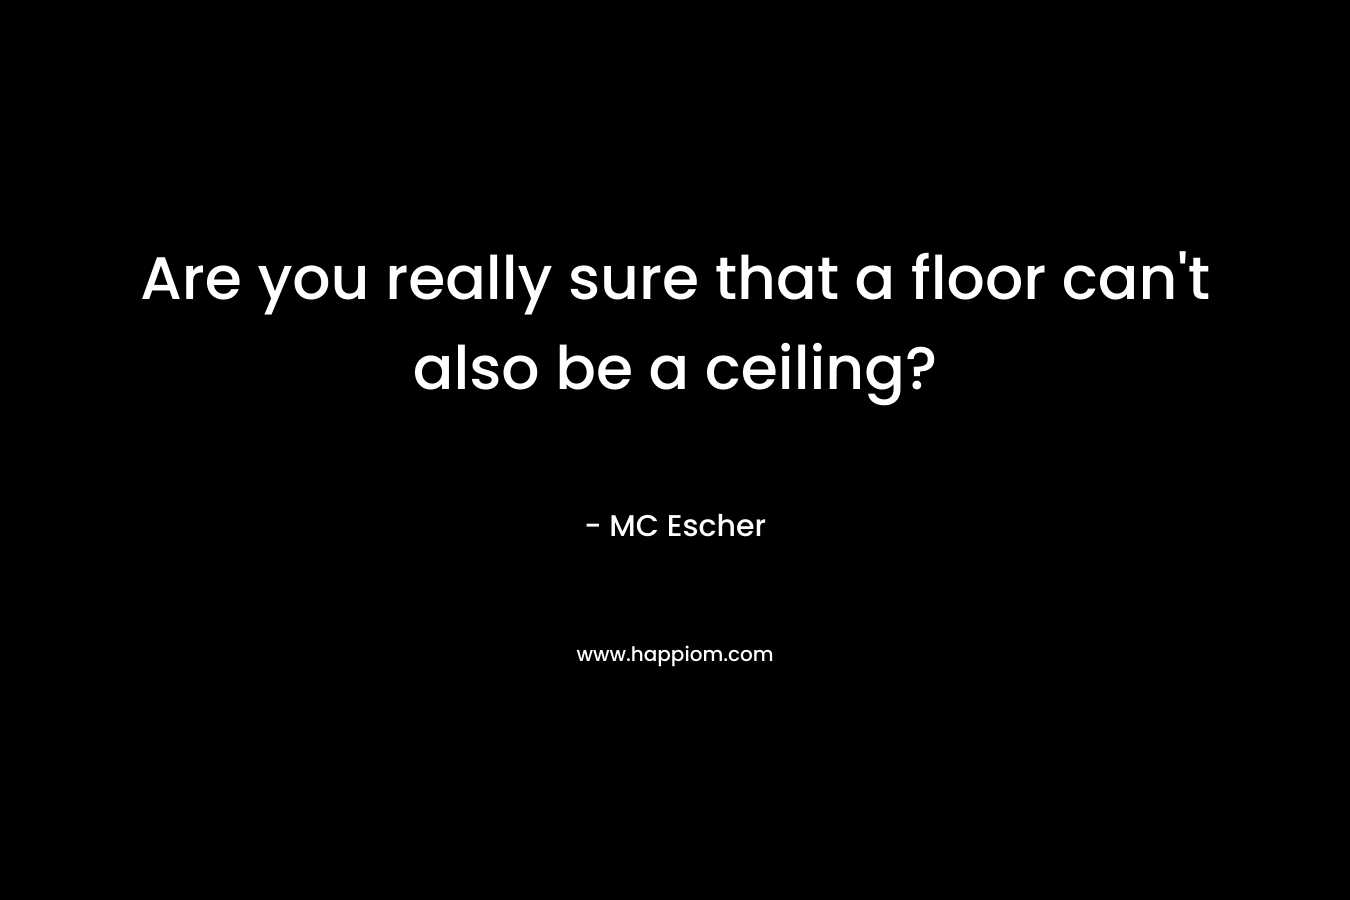 Are you really sure that a floor can’t also be a ceiling? – MC Escher